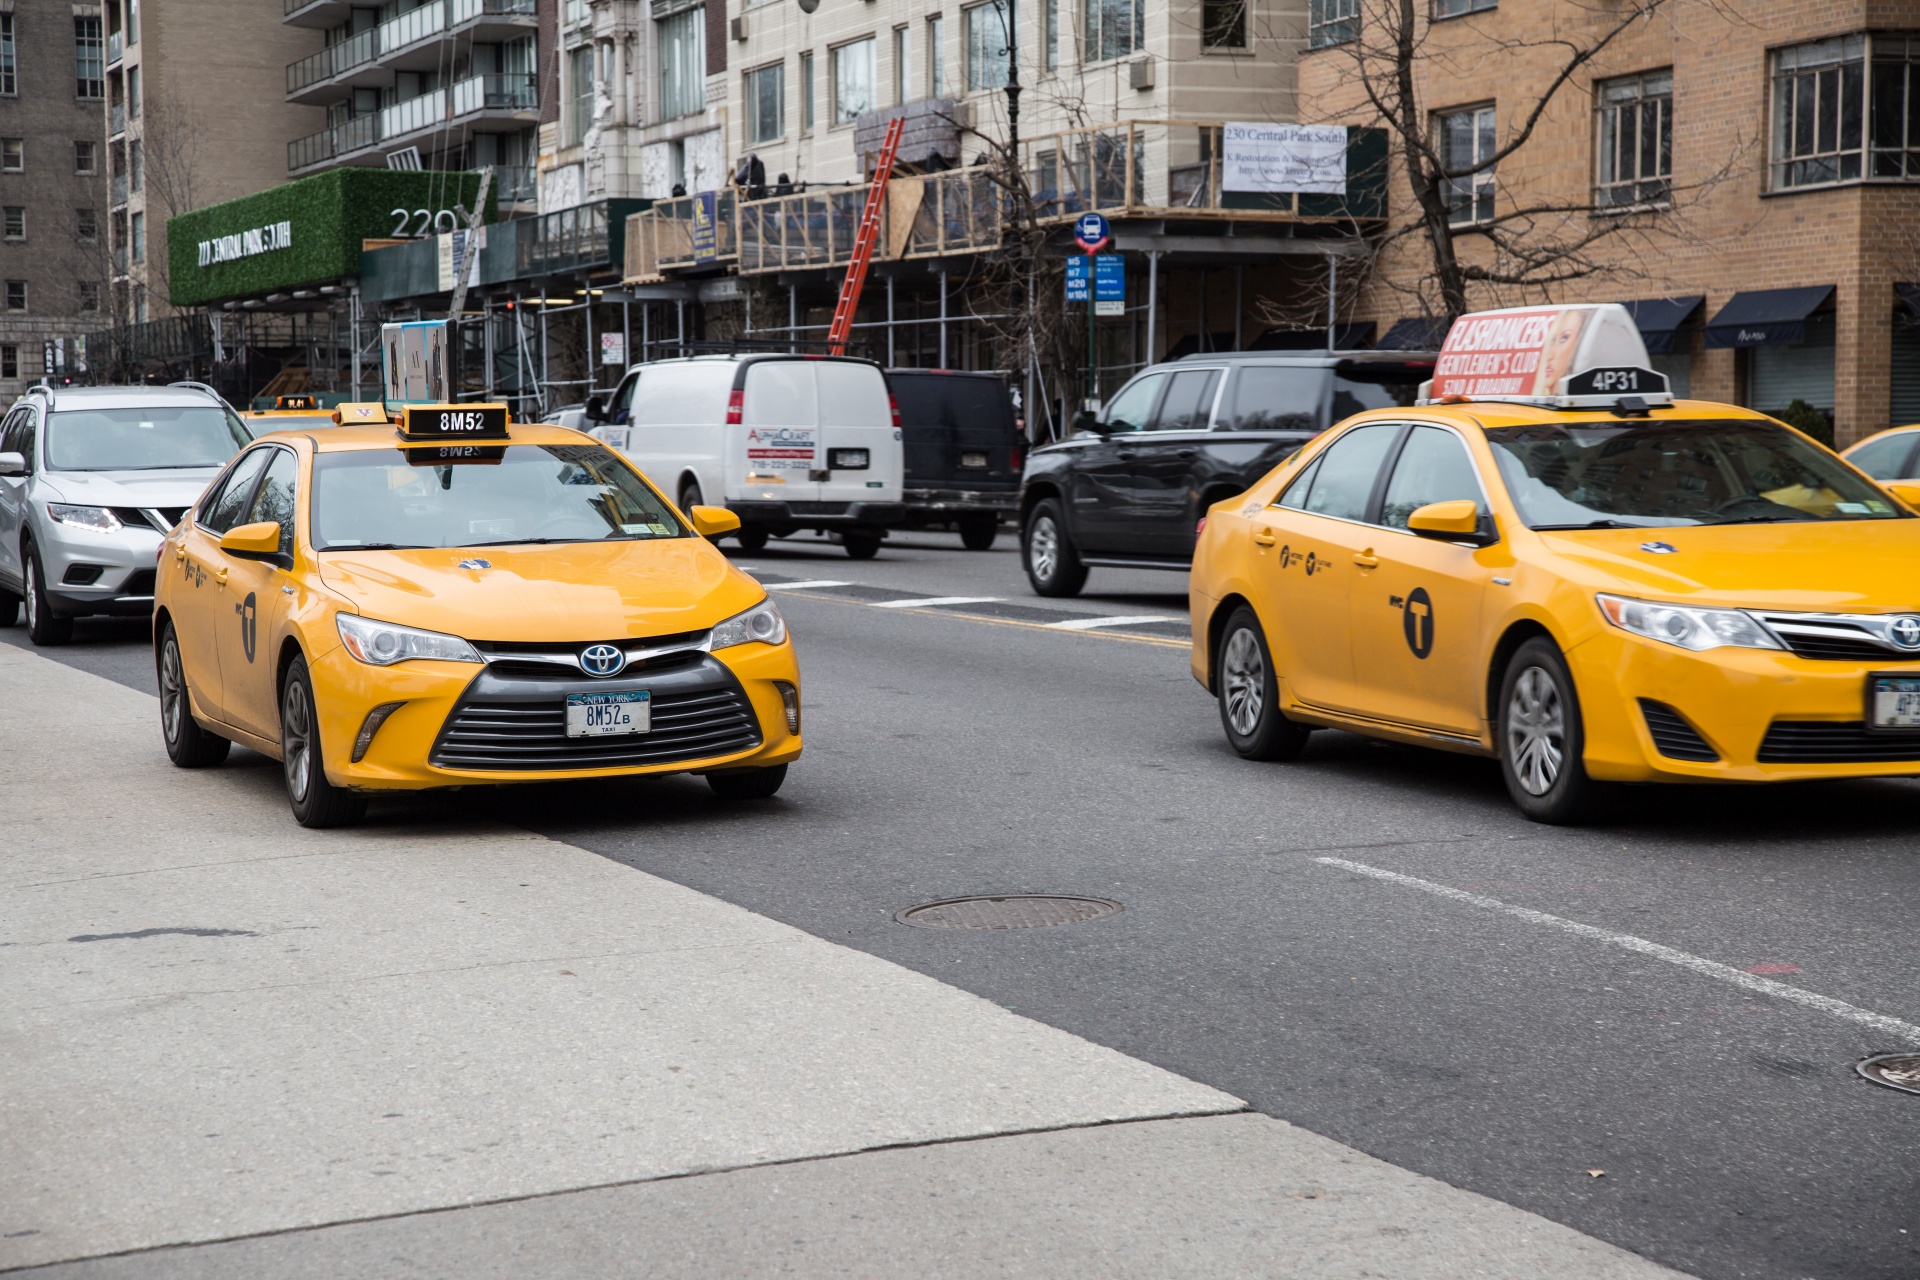 NYC Yellow Taxi Free Stock Photo - Public Domain Pictures